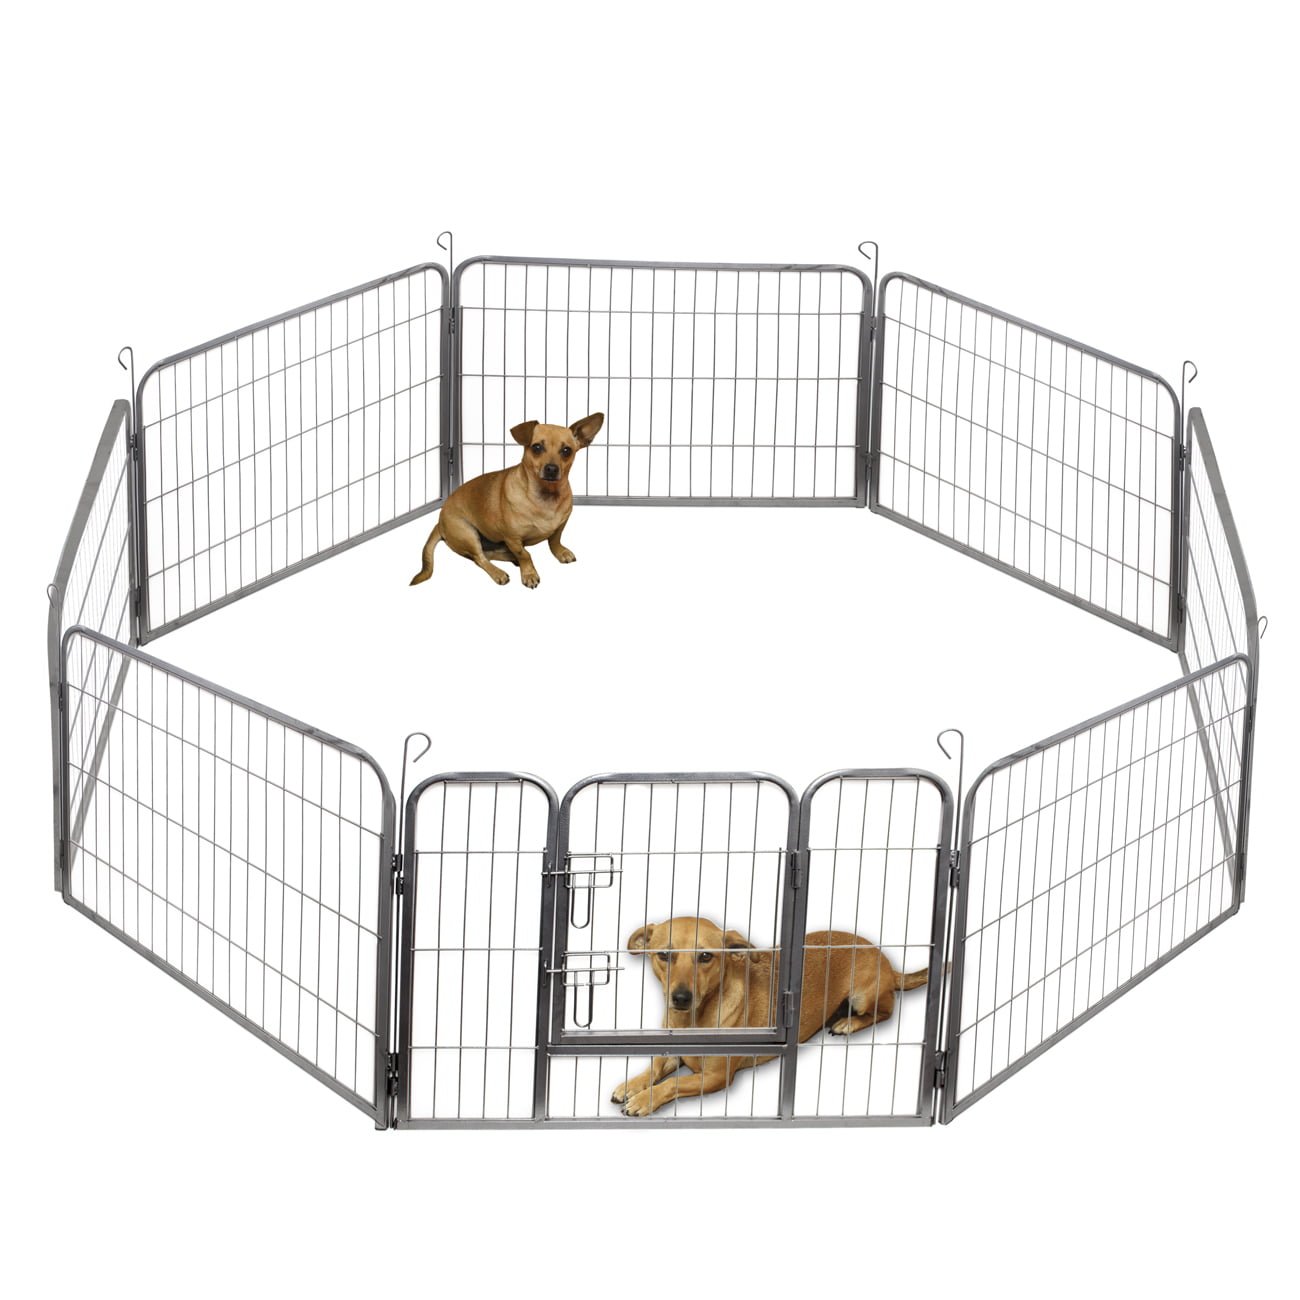 Midwest 8 Panel Dog Exercise Pen, Black 